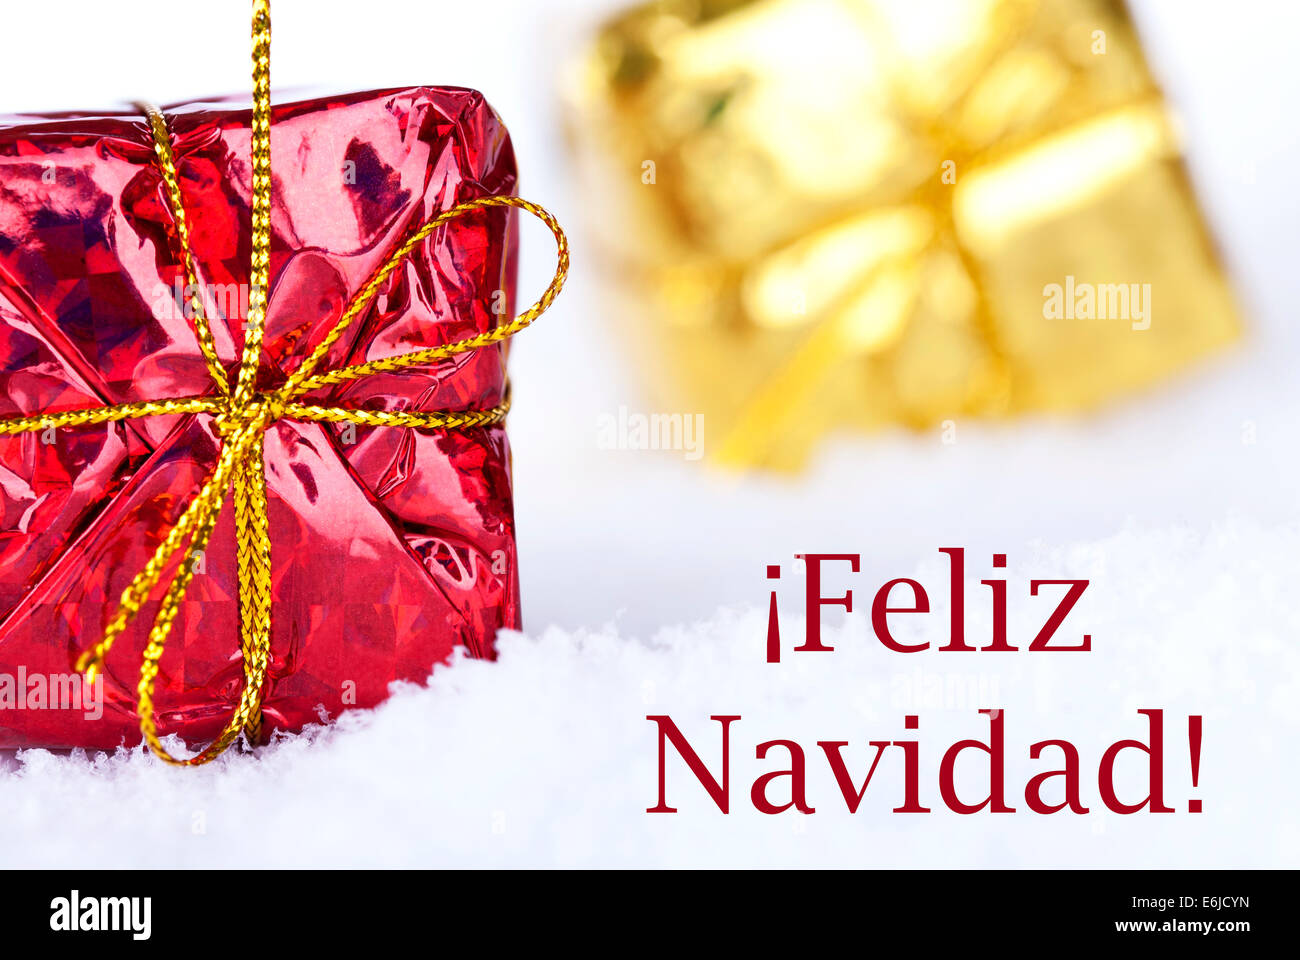 Christmas Gifts in the Snow with the Spanish Christmas Greetings Feliz Navidad which means Merry Christmas Stock Photo